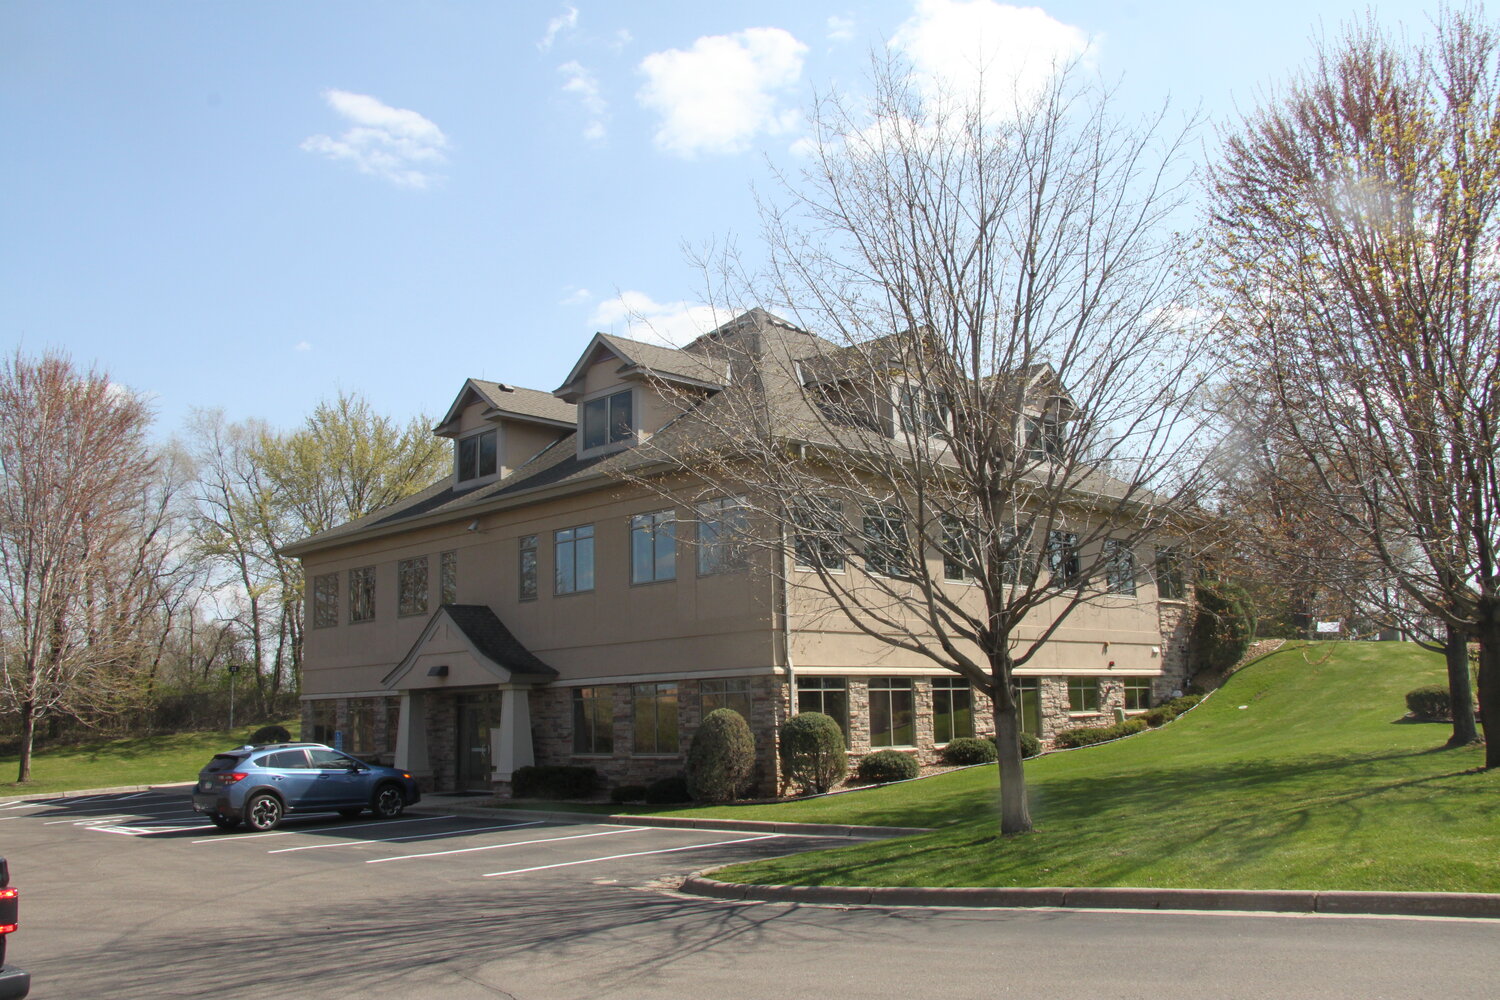 Exterior view showing the EveresT location in Eagan, Minnesota